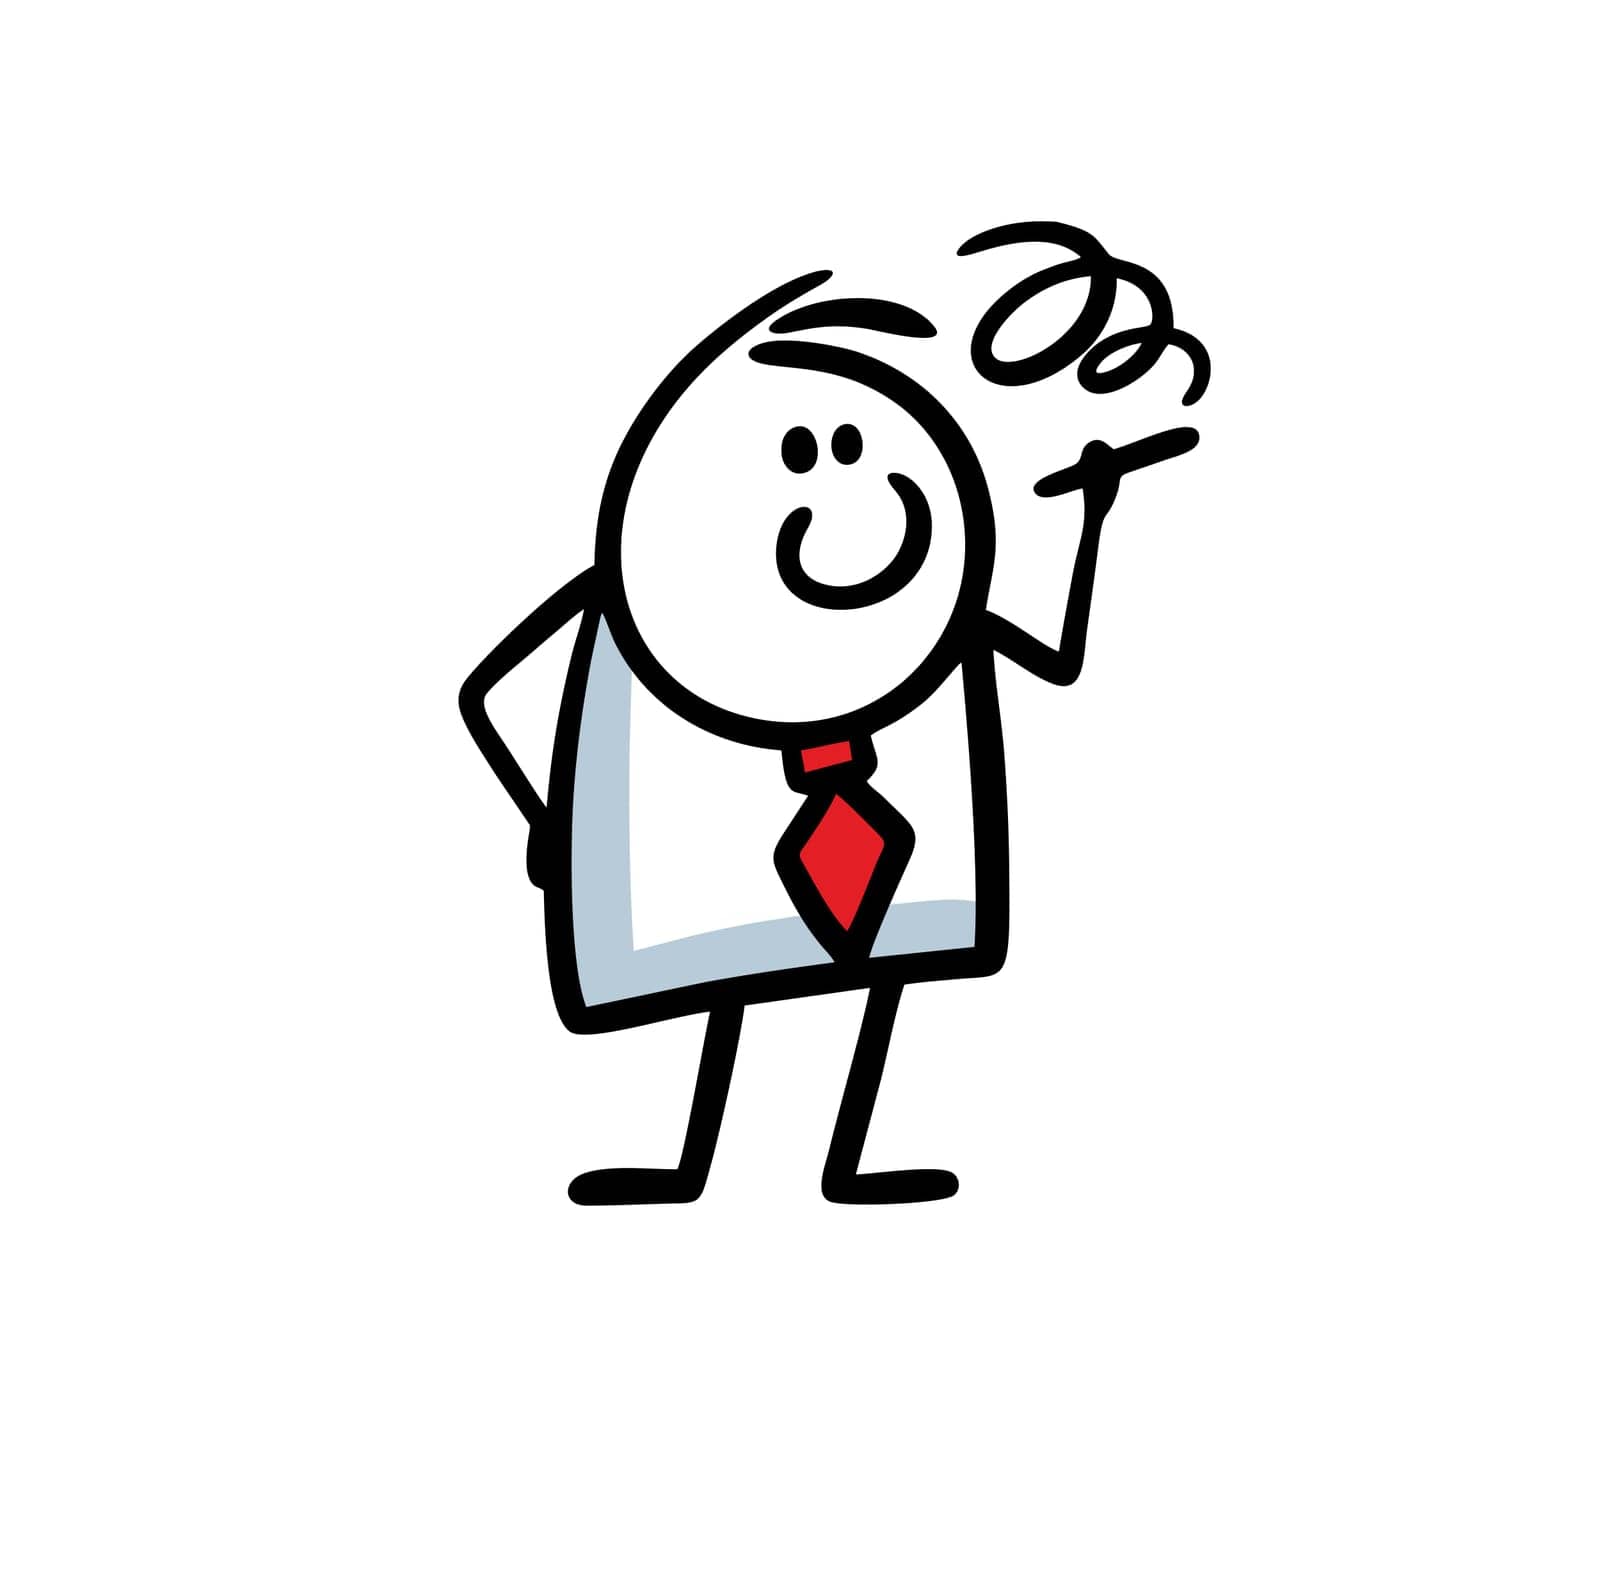 Doodle businessman in office suit smokes during break and has rest. Vector illustration of relaxing stick figure man after work.